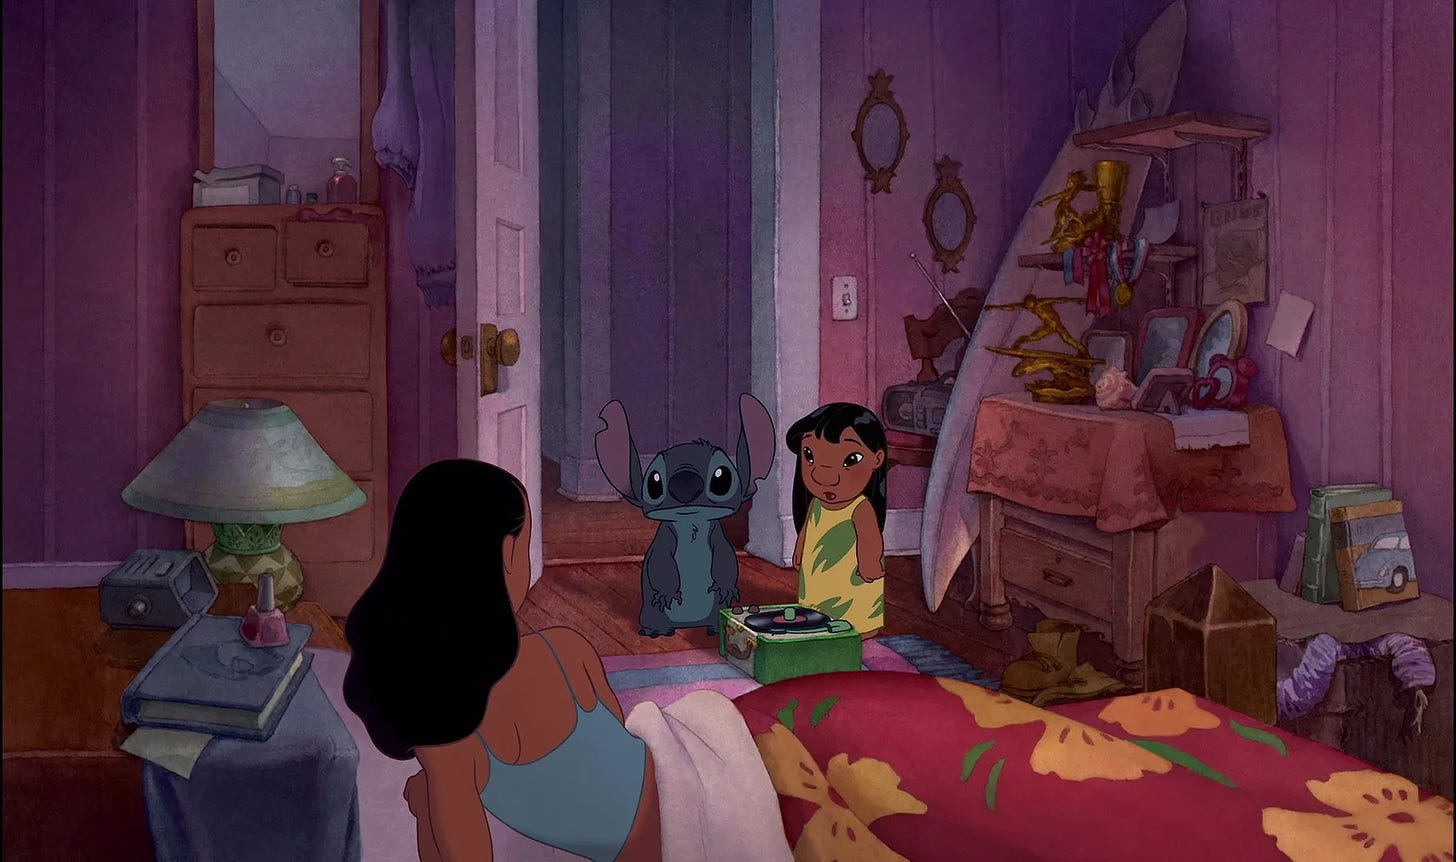 Lilo and Stitch waking Nani up in her room to play her Elvis music.